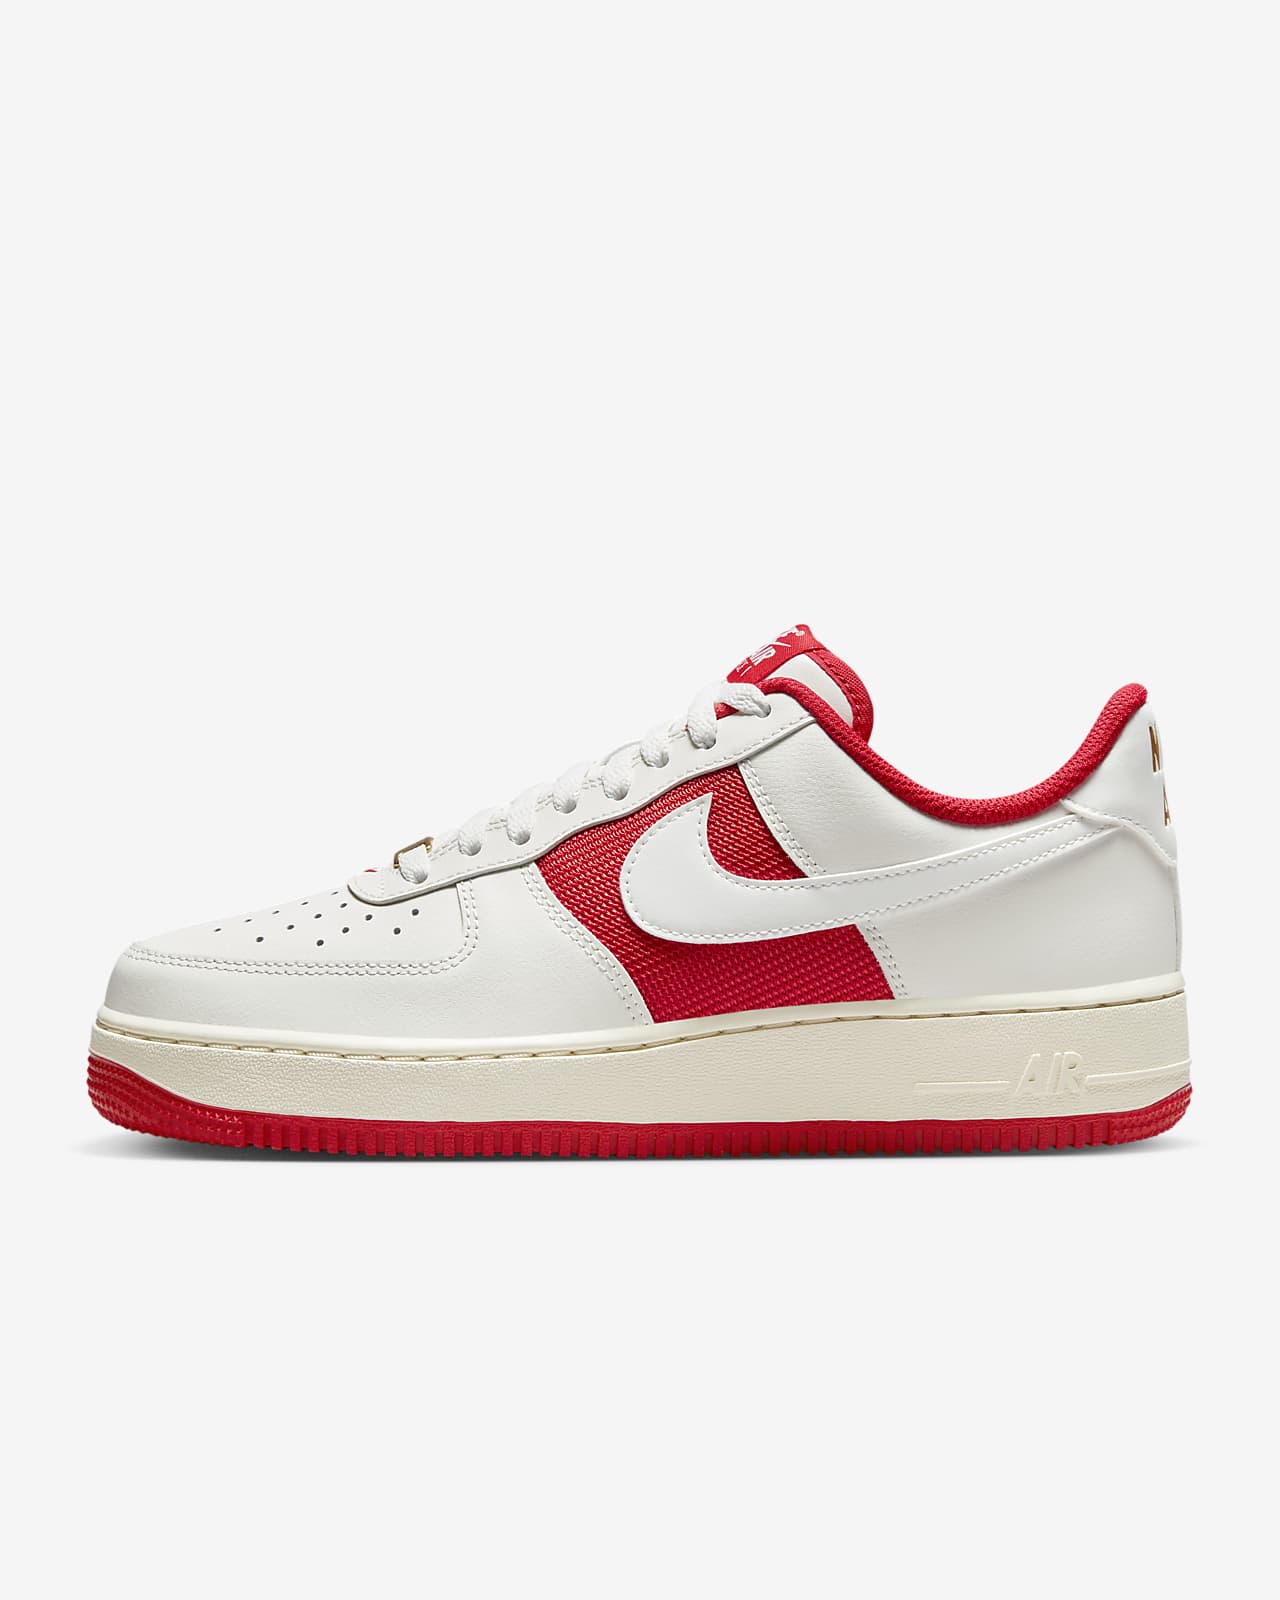 Nike, Shoes, Nike First Use Air Force University Red